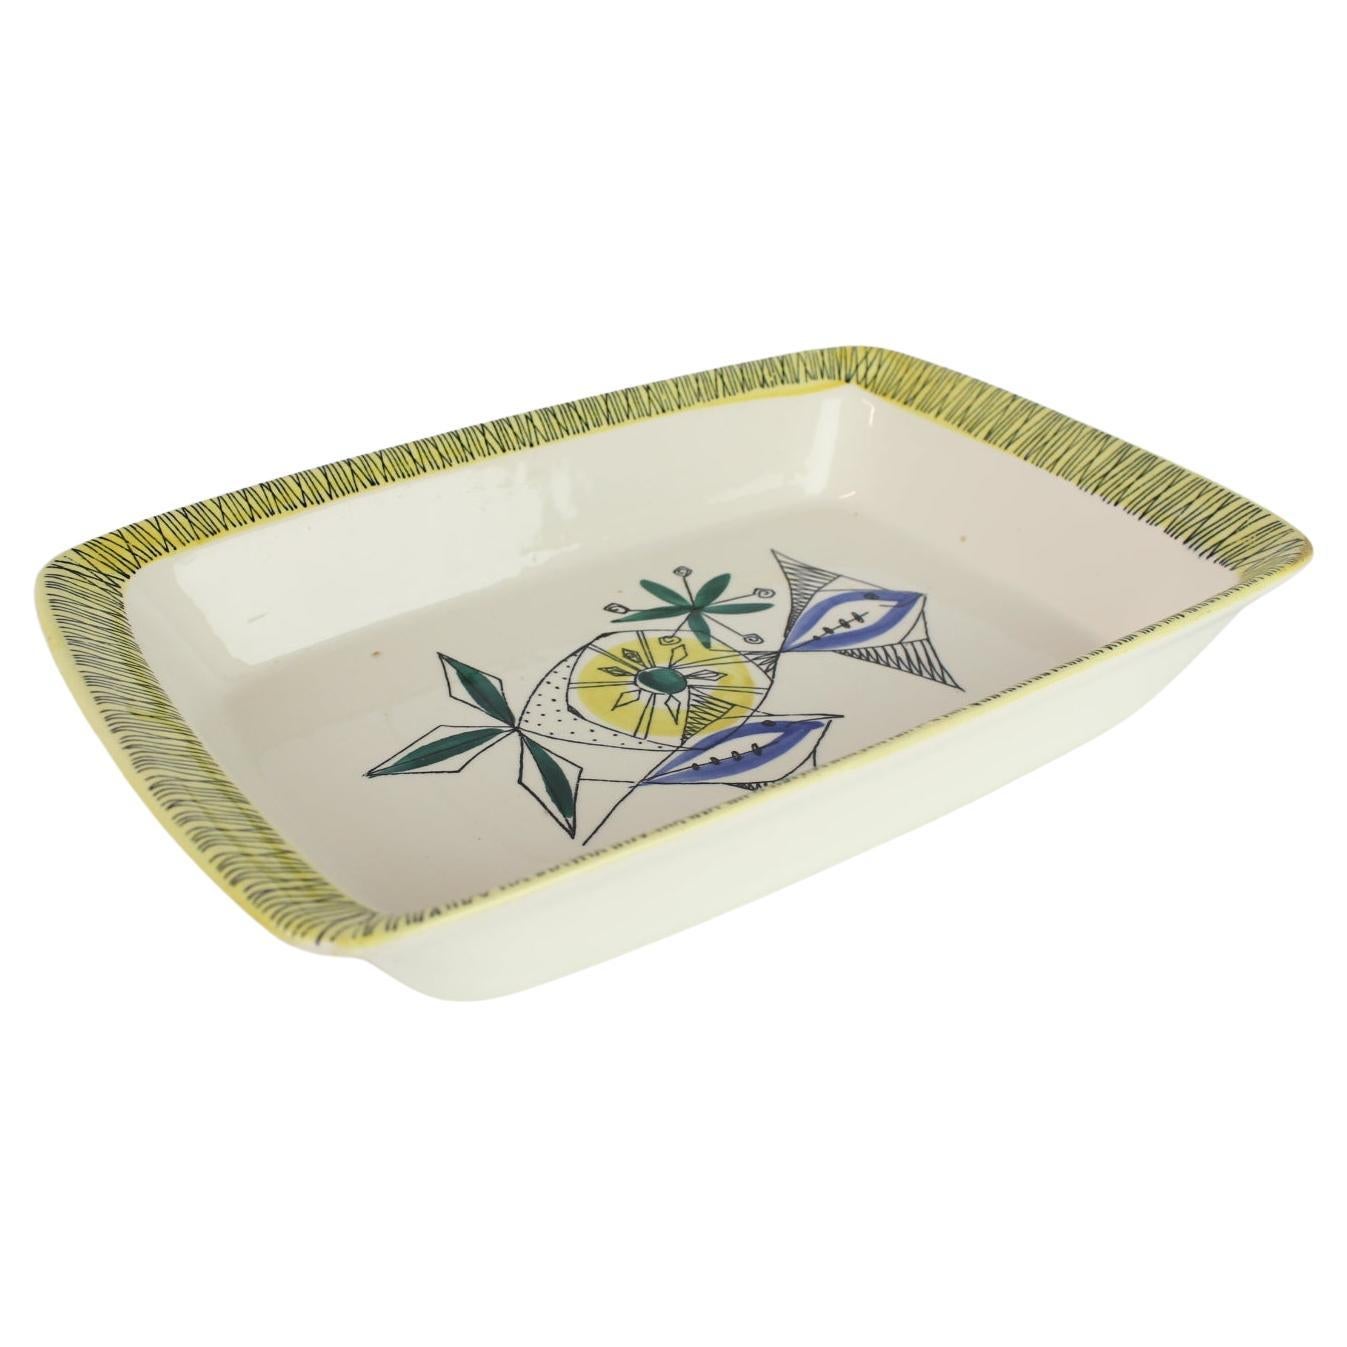 Norway Ceramic Bowl, Bambus Ildfast, 1950s For Sale